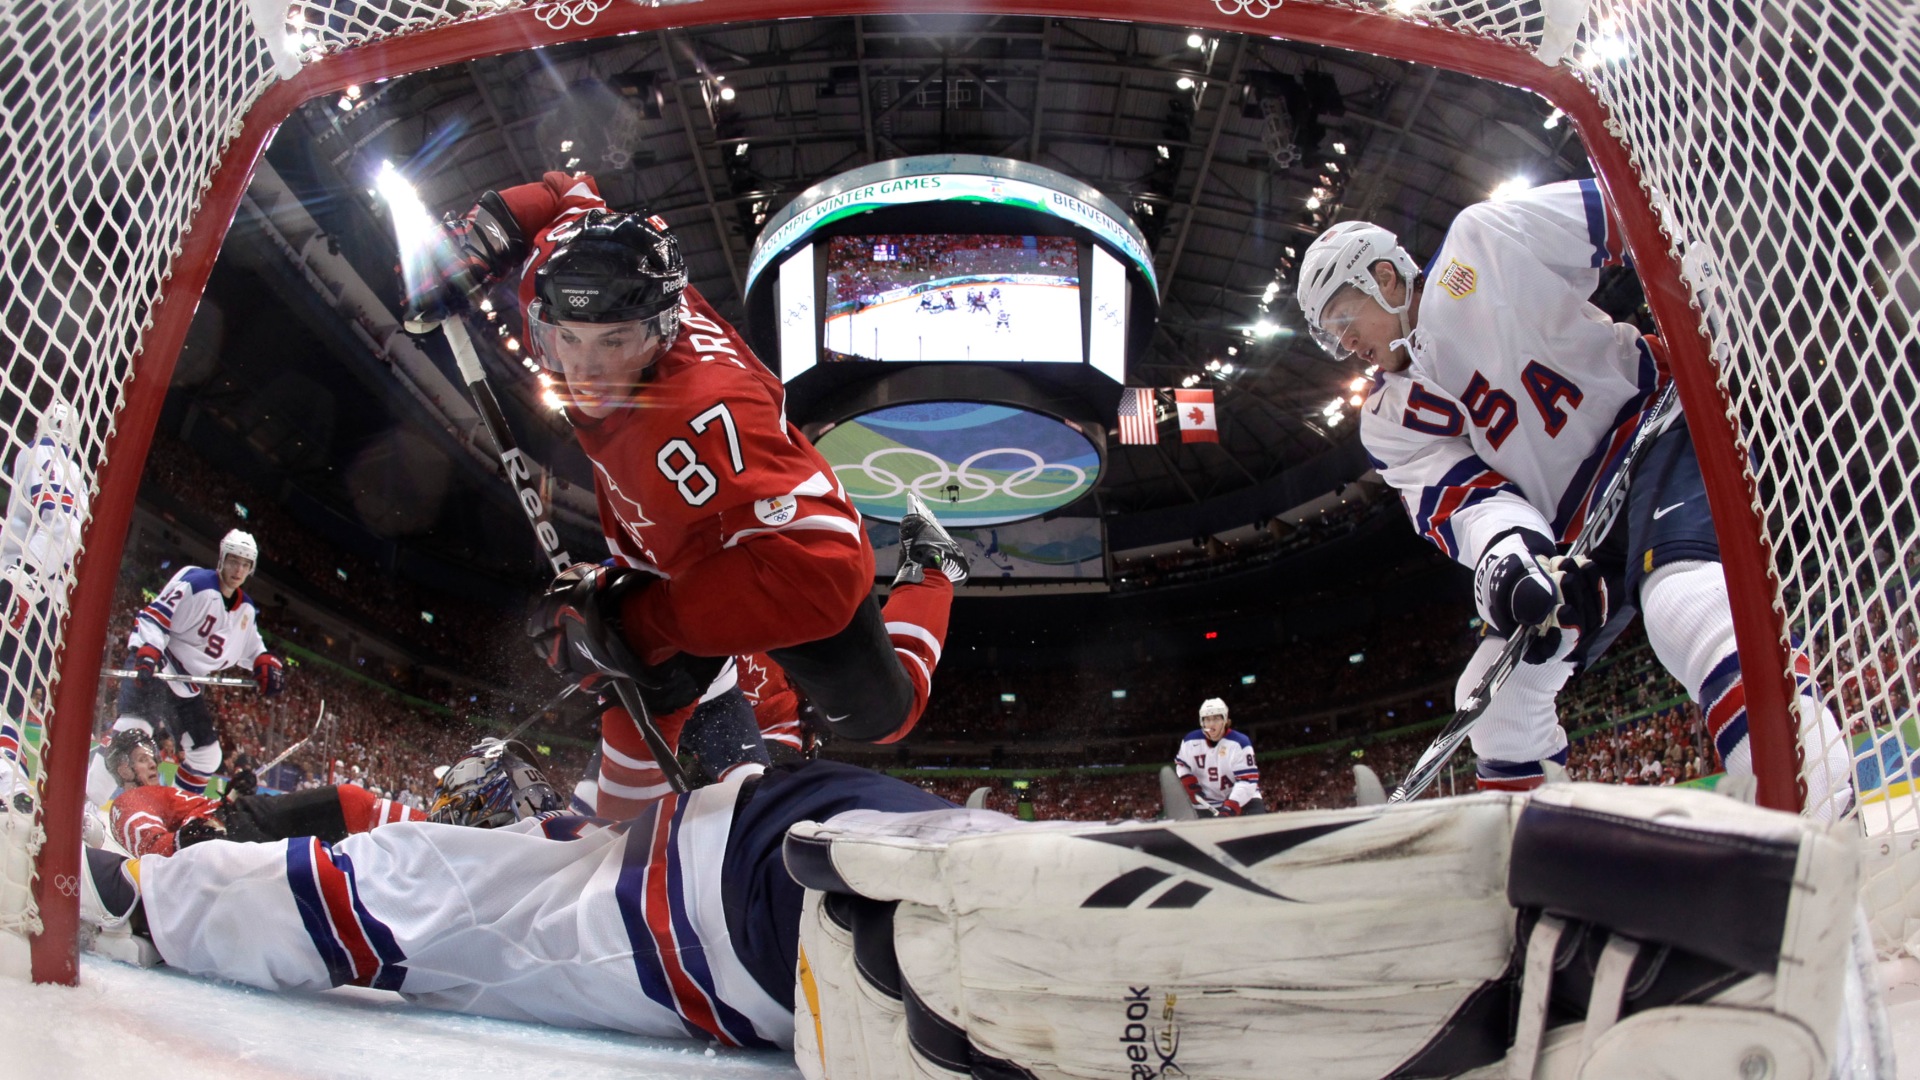 T.J. Oshie leads USA to thrilling shootout win over Russia